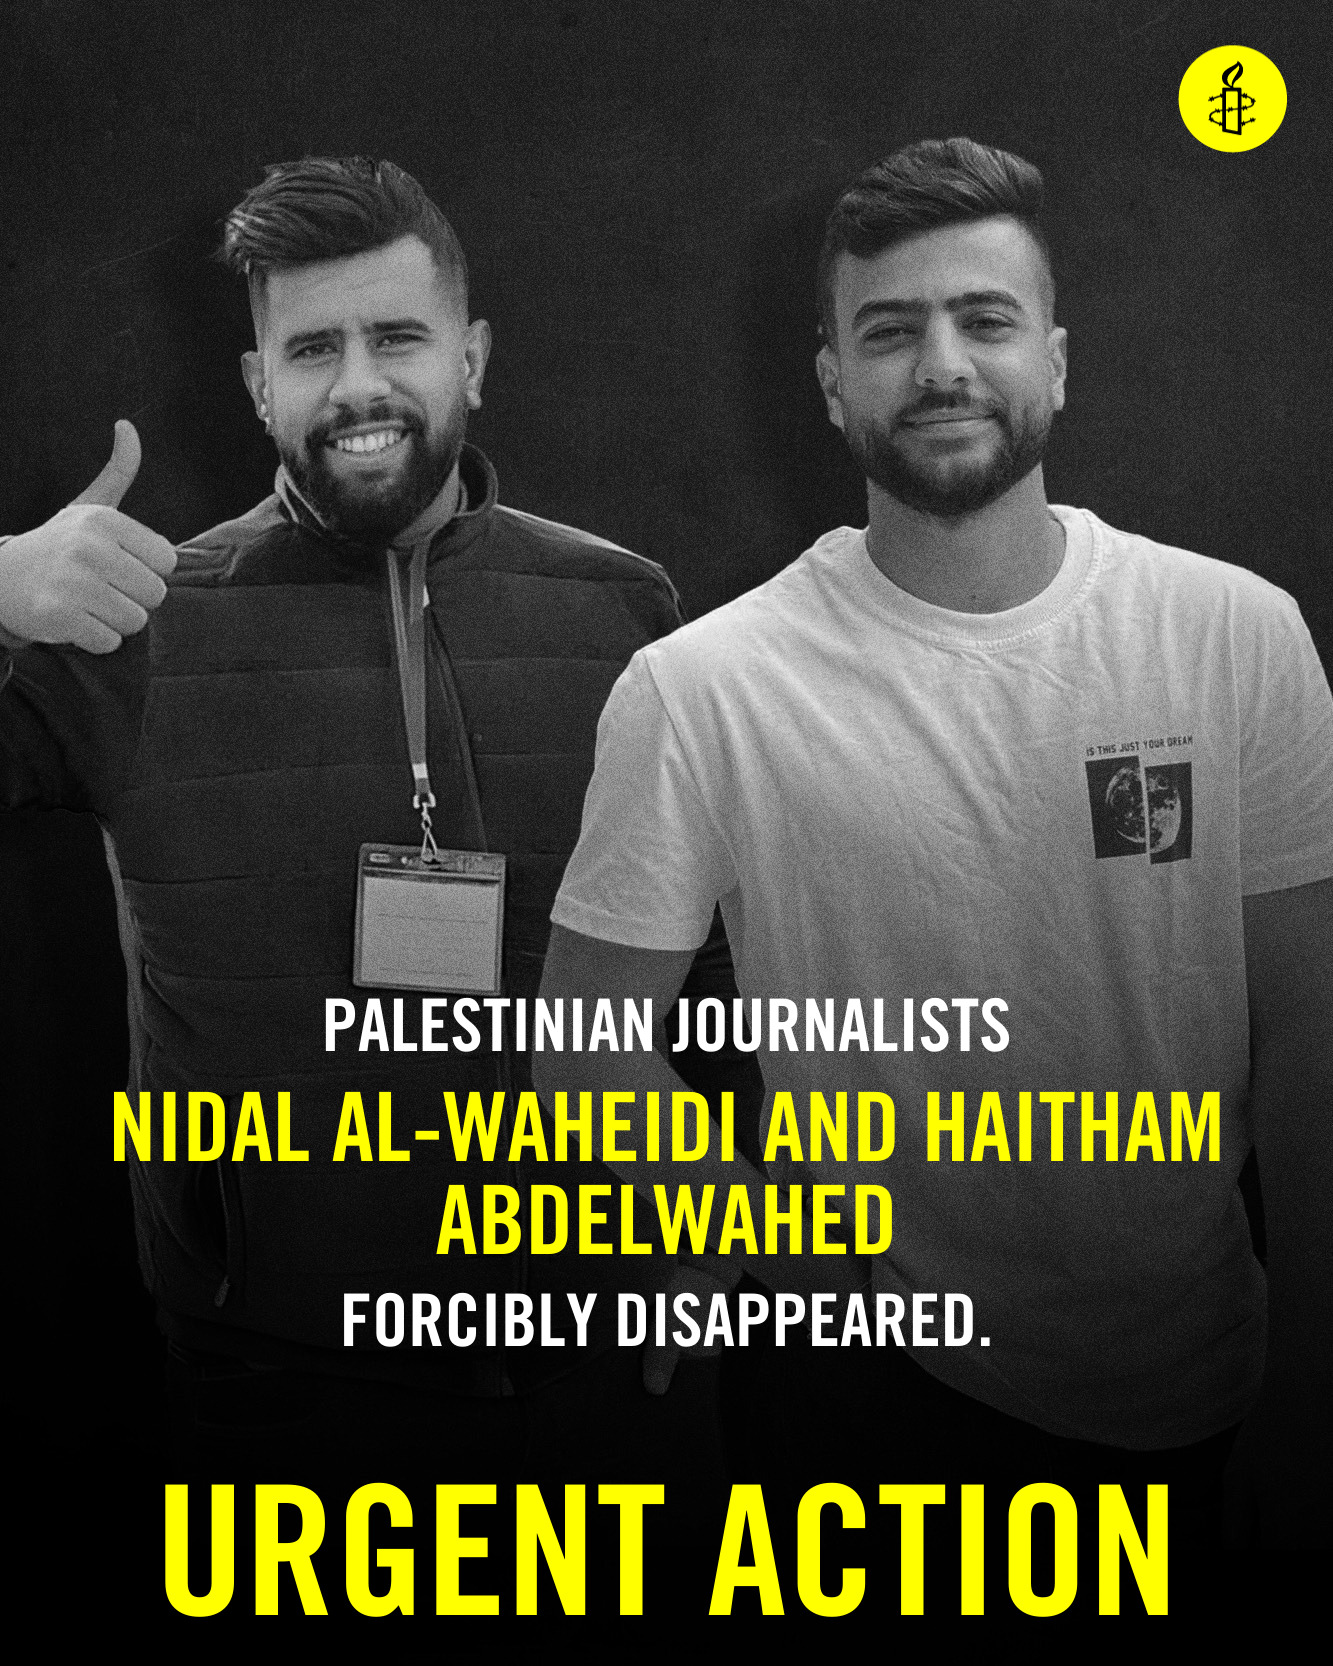 Urgent Action: Palestinian journalists forcibly disappeared